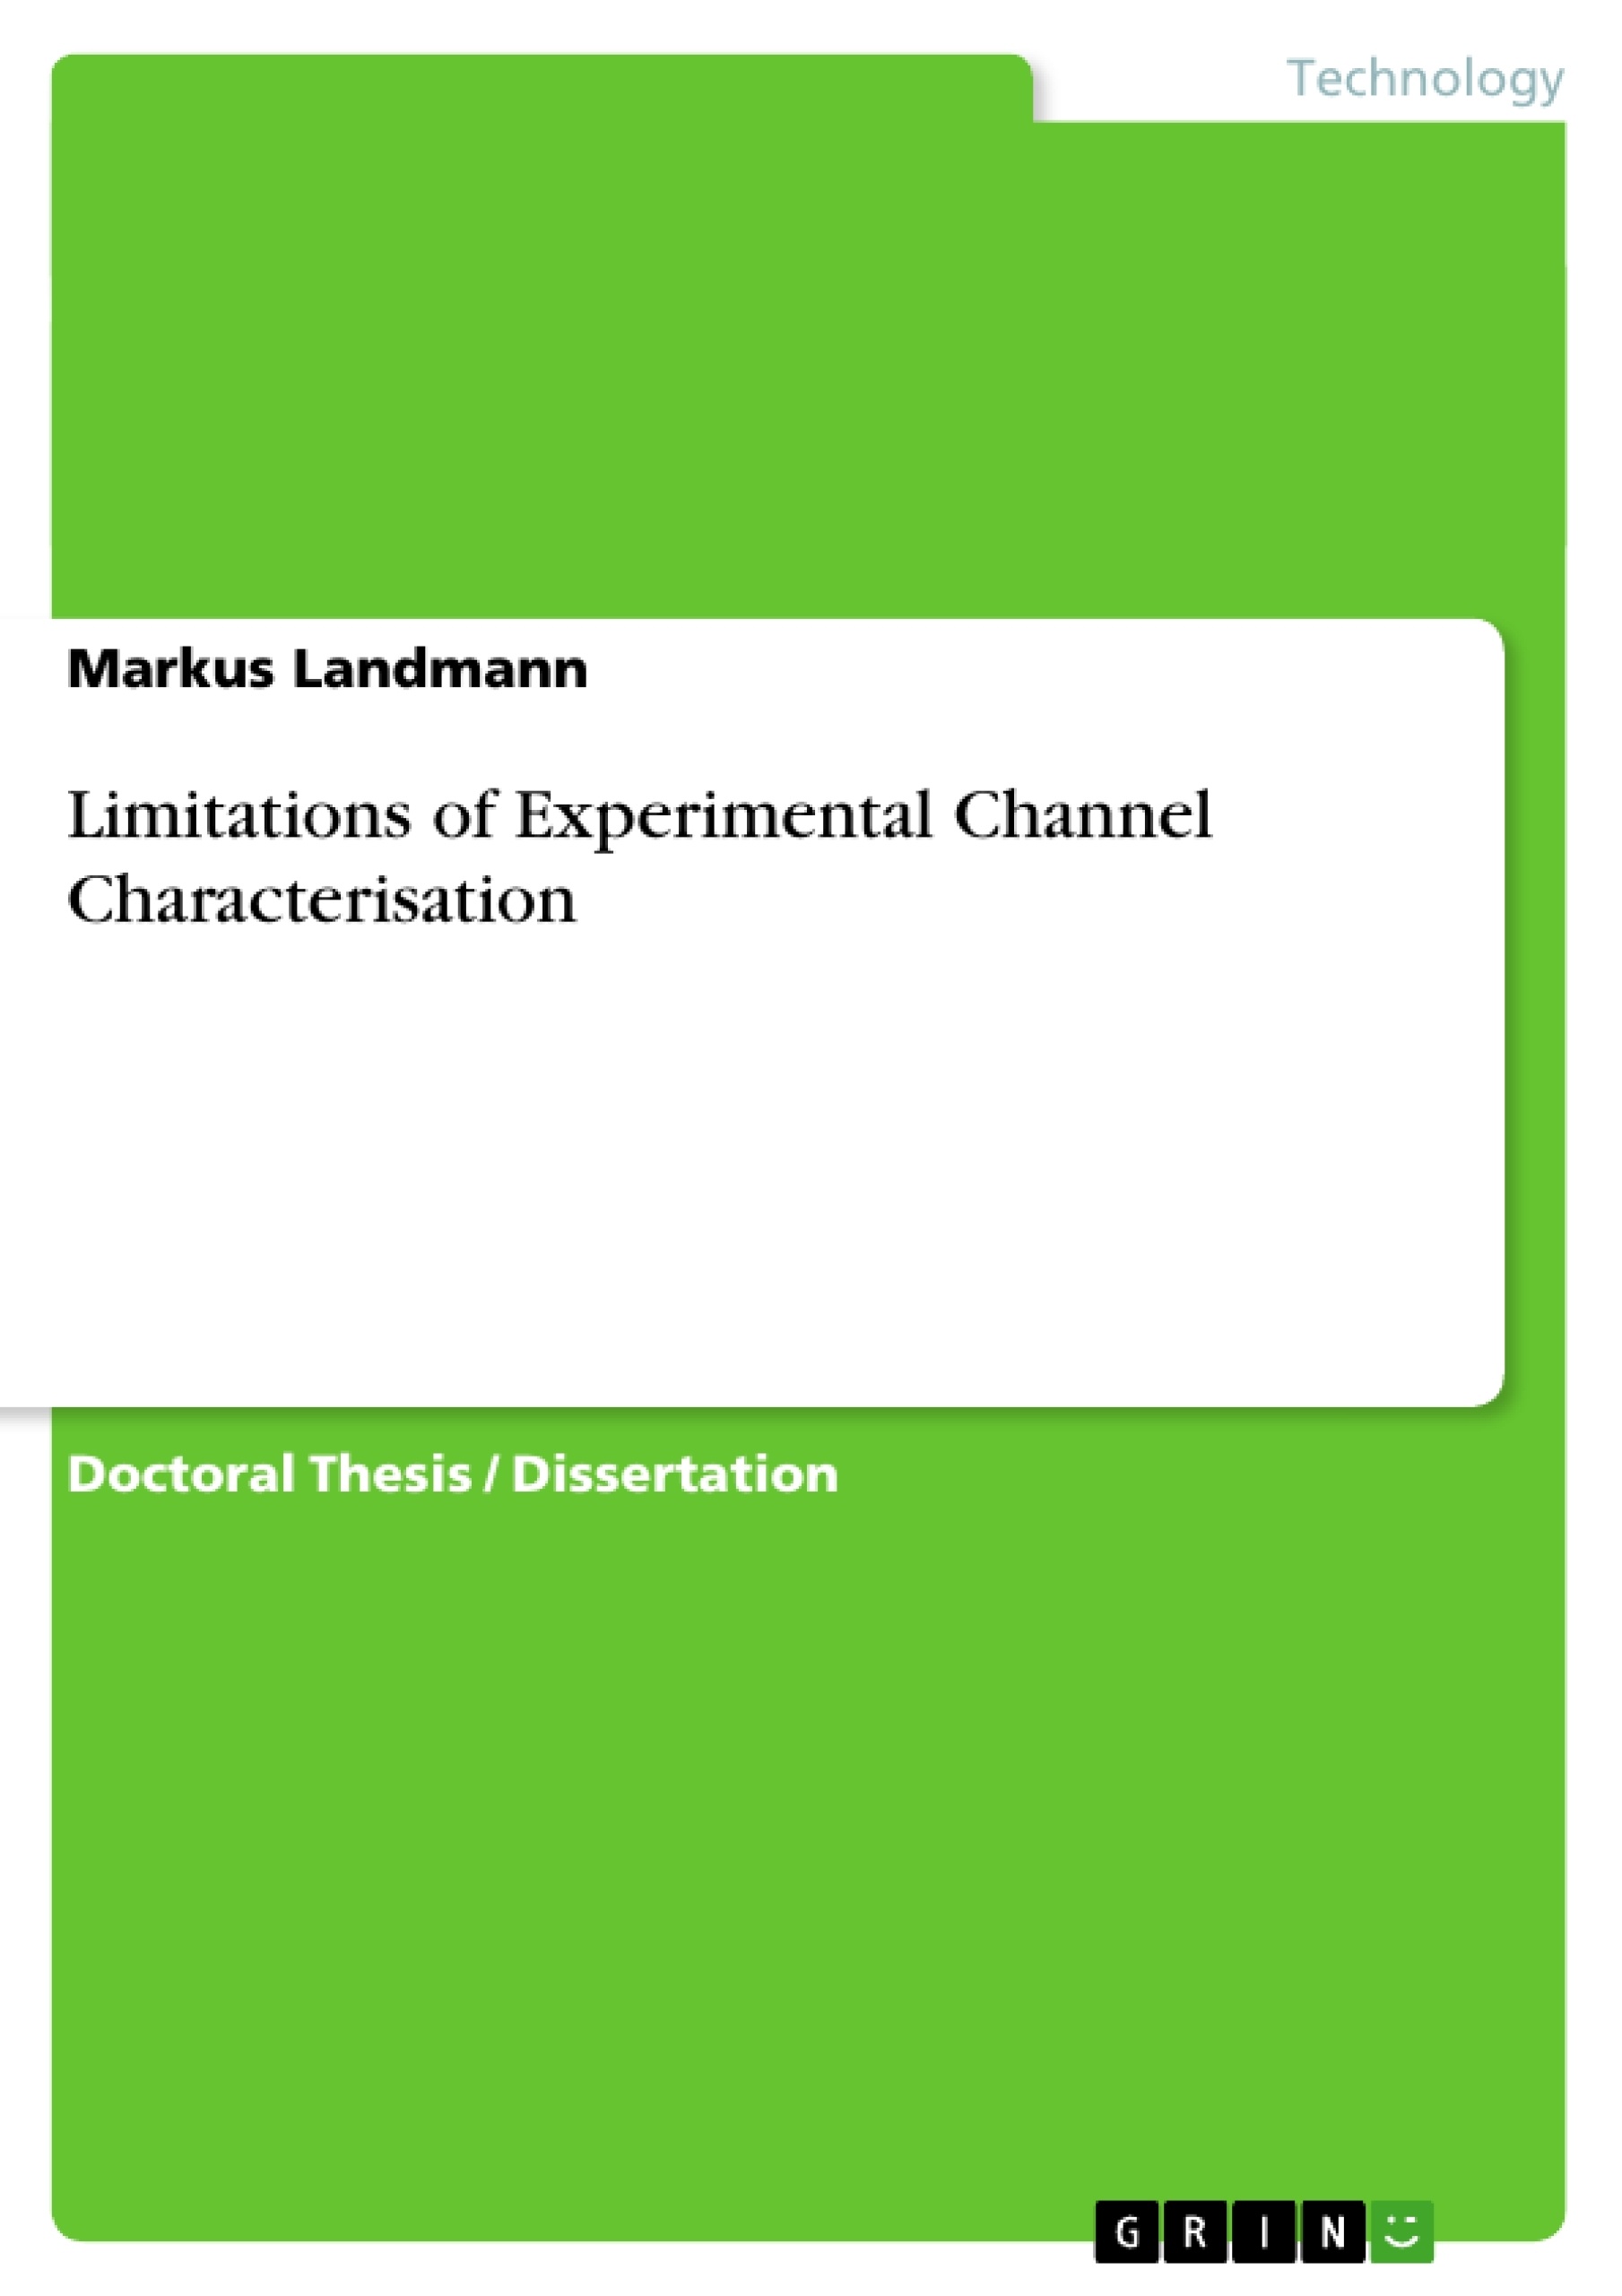 Title: Limitations of Experimental Channel Characterisation